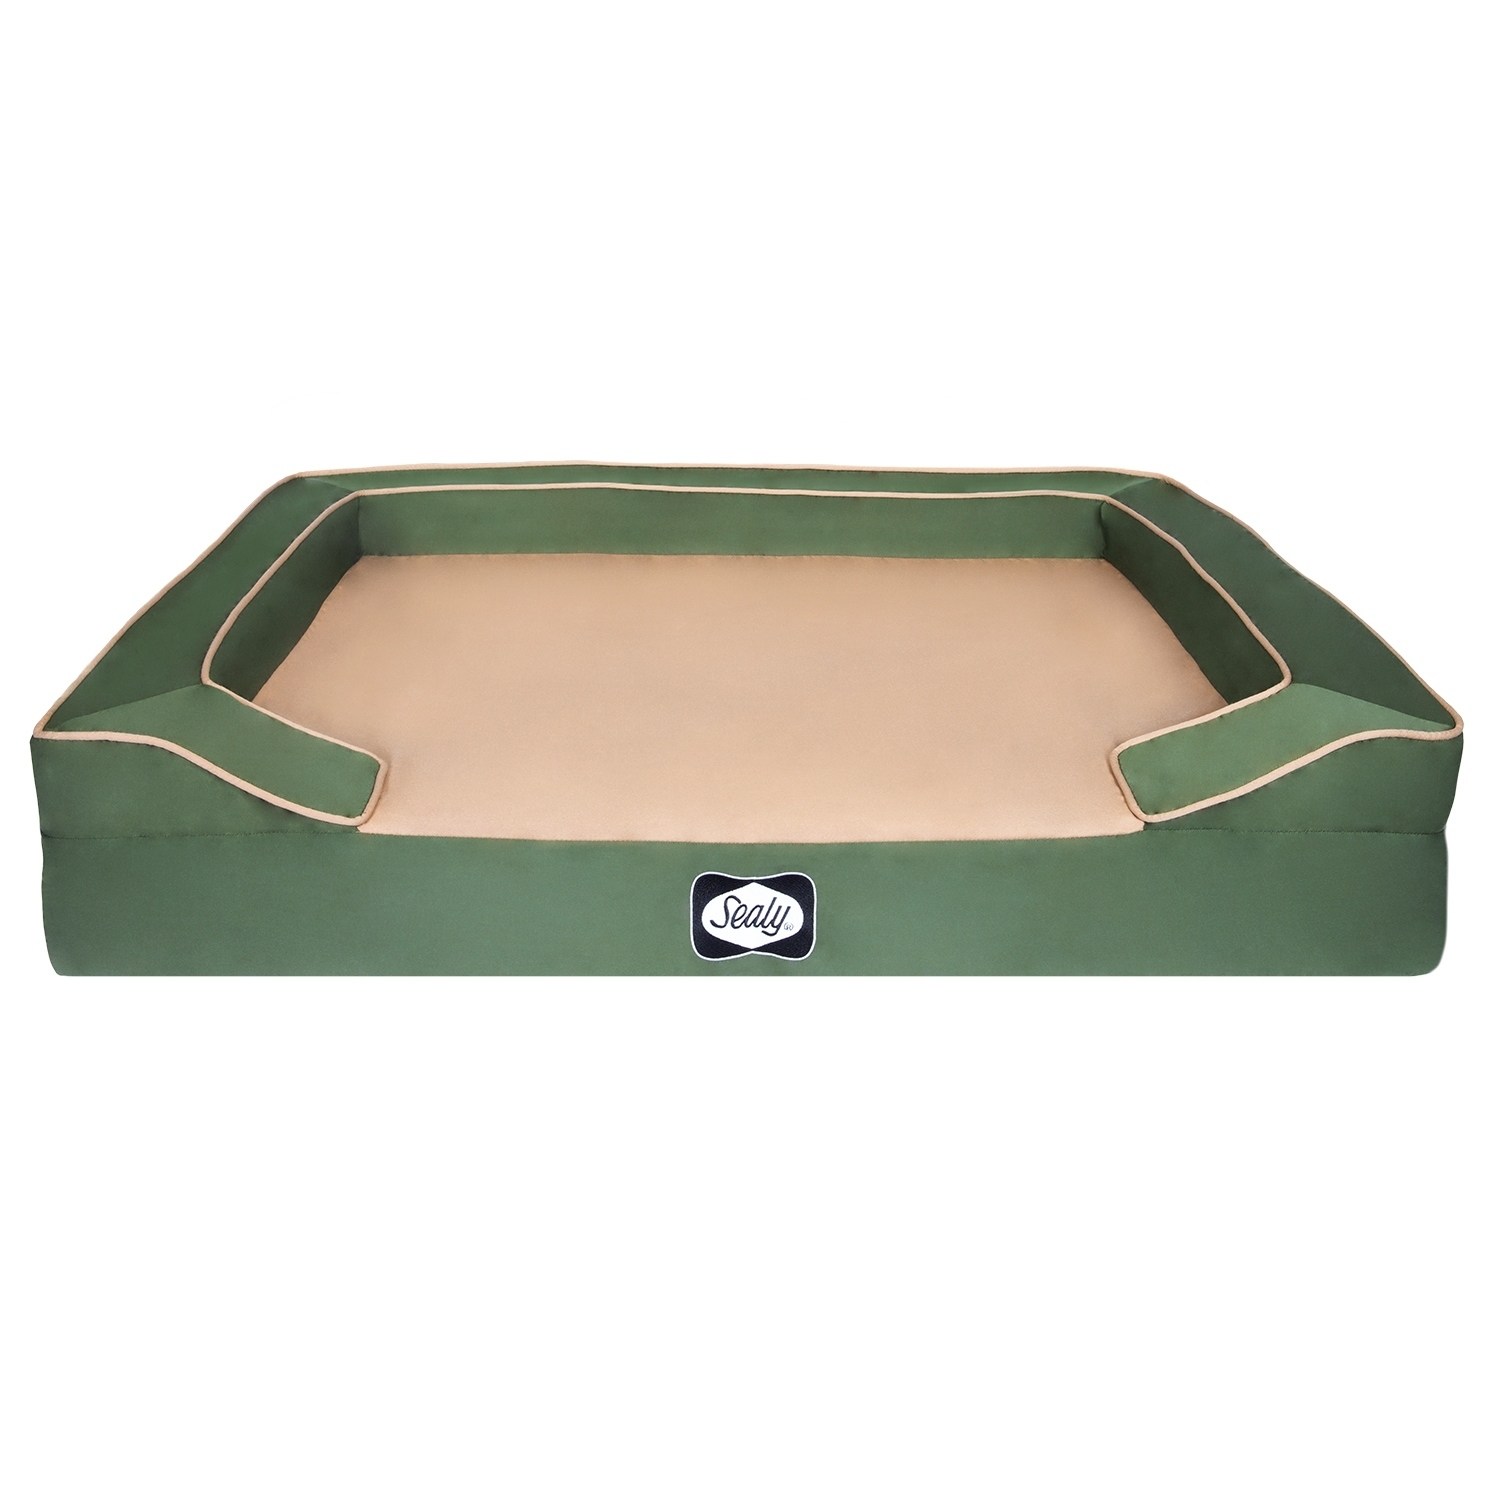 Sealy Lux Elite Quad Element Orthopedic and Memory Foam Dog Bed - image 1 of 4